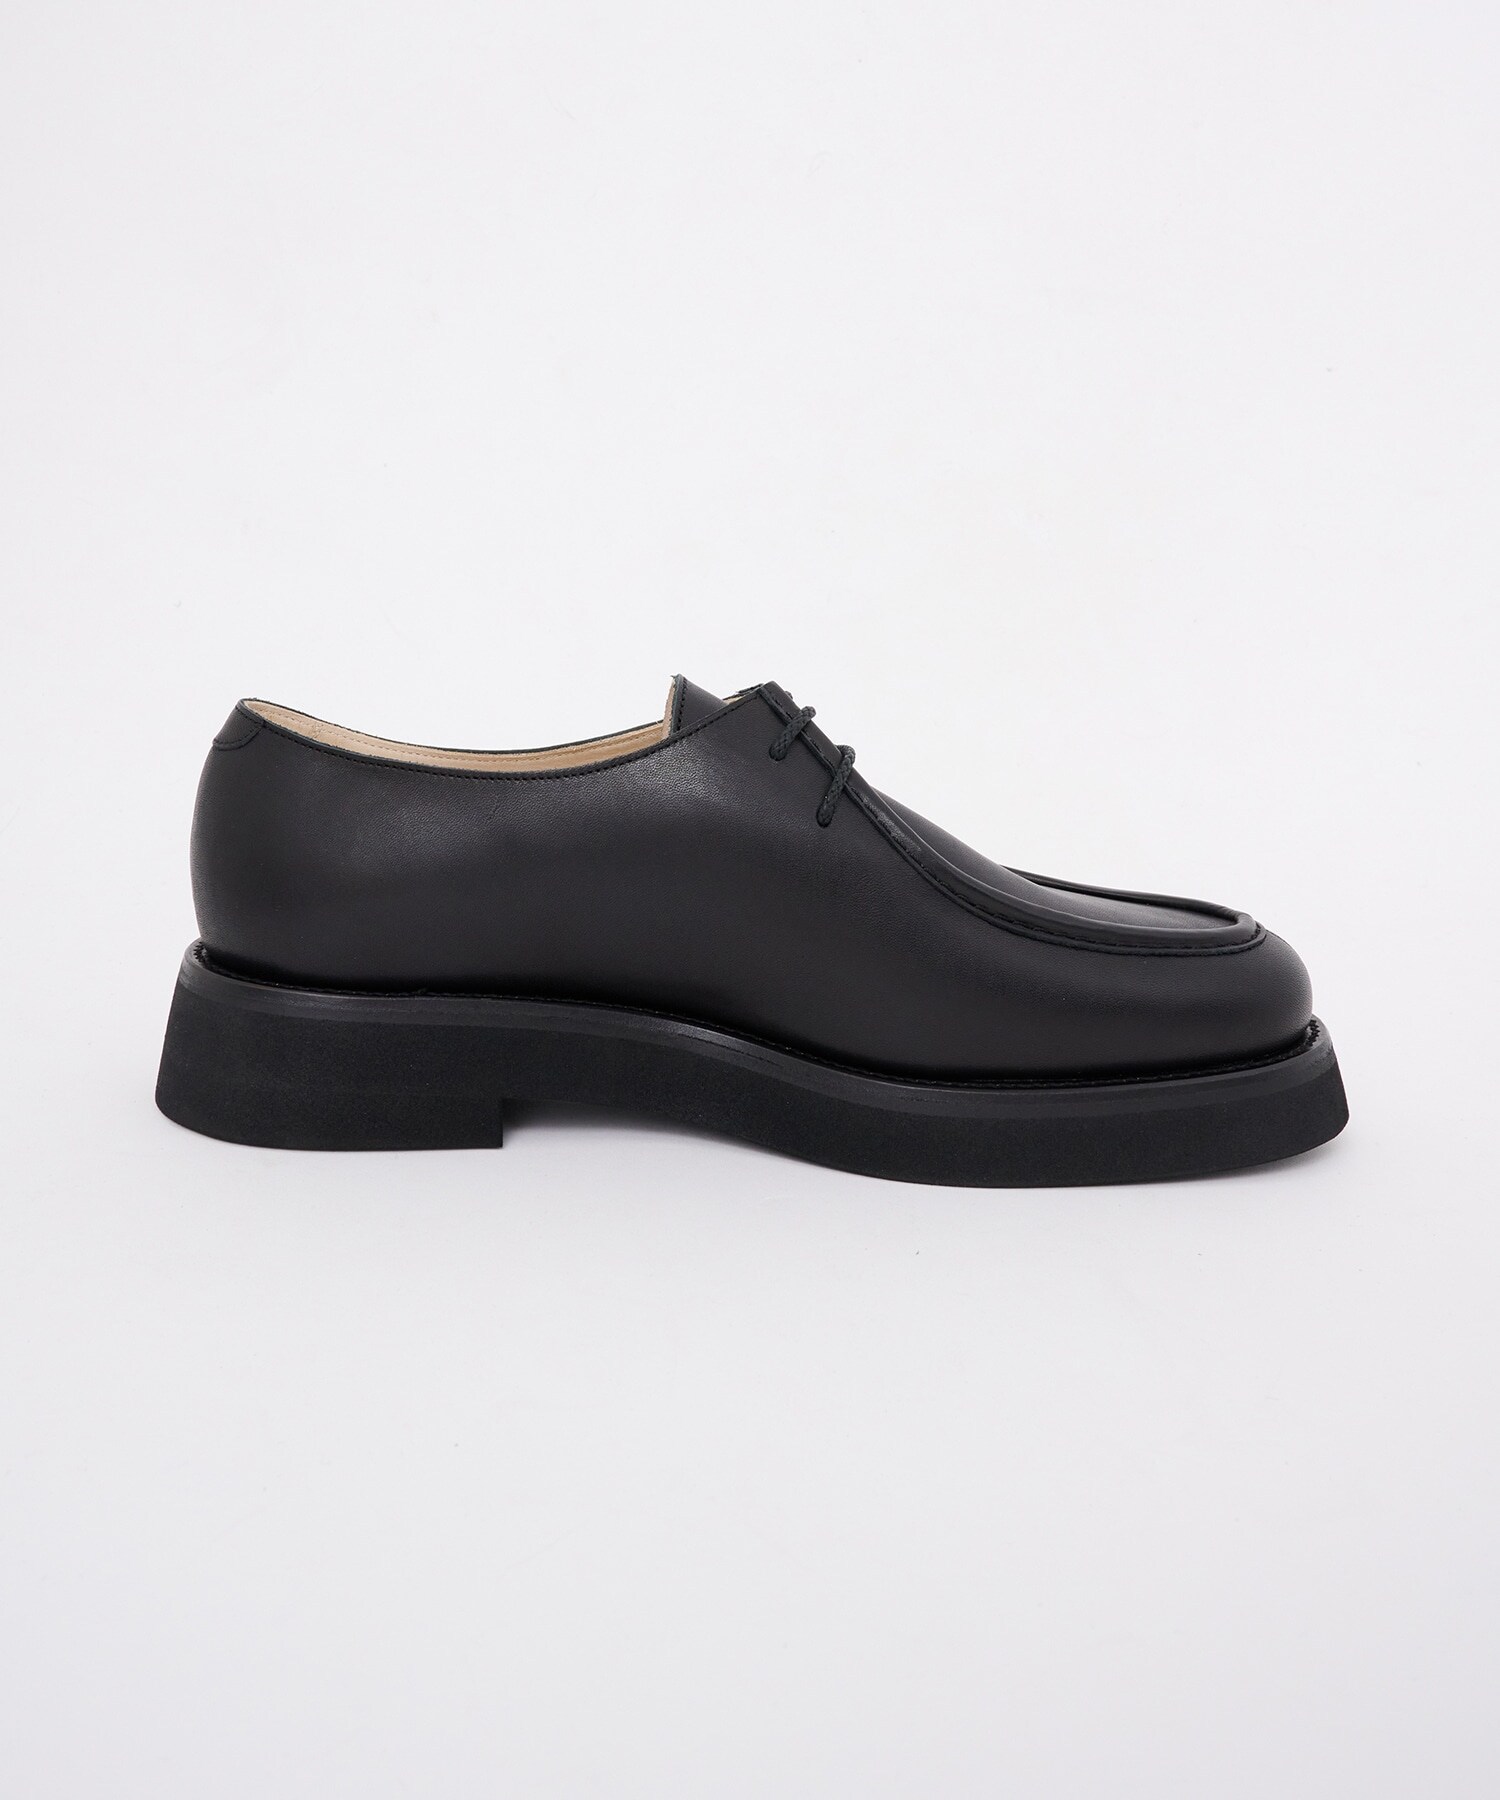 TIROLEAN SHOES(HARDNESS 60 SOLE) foot the coacher